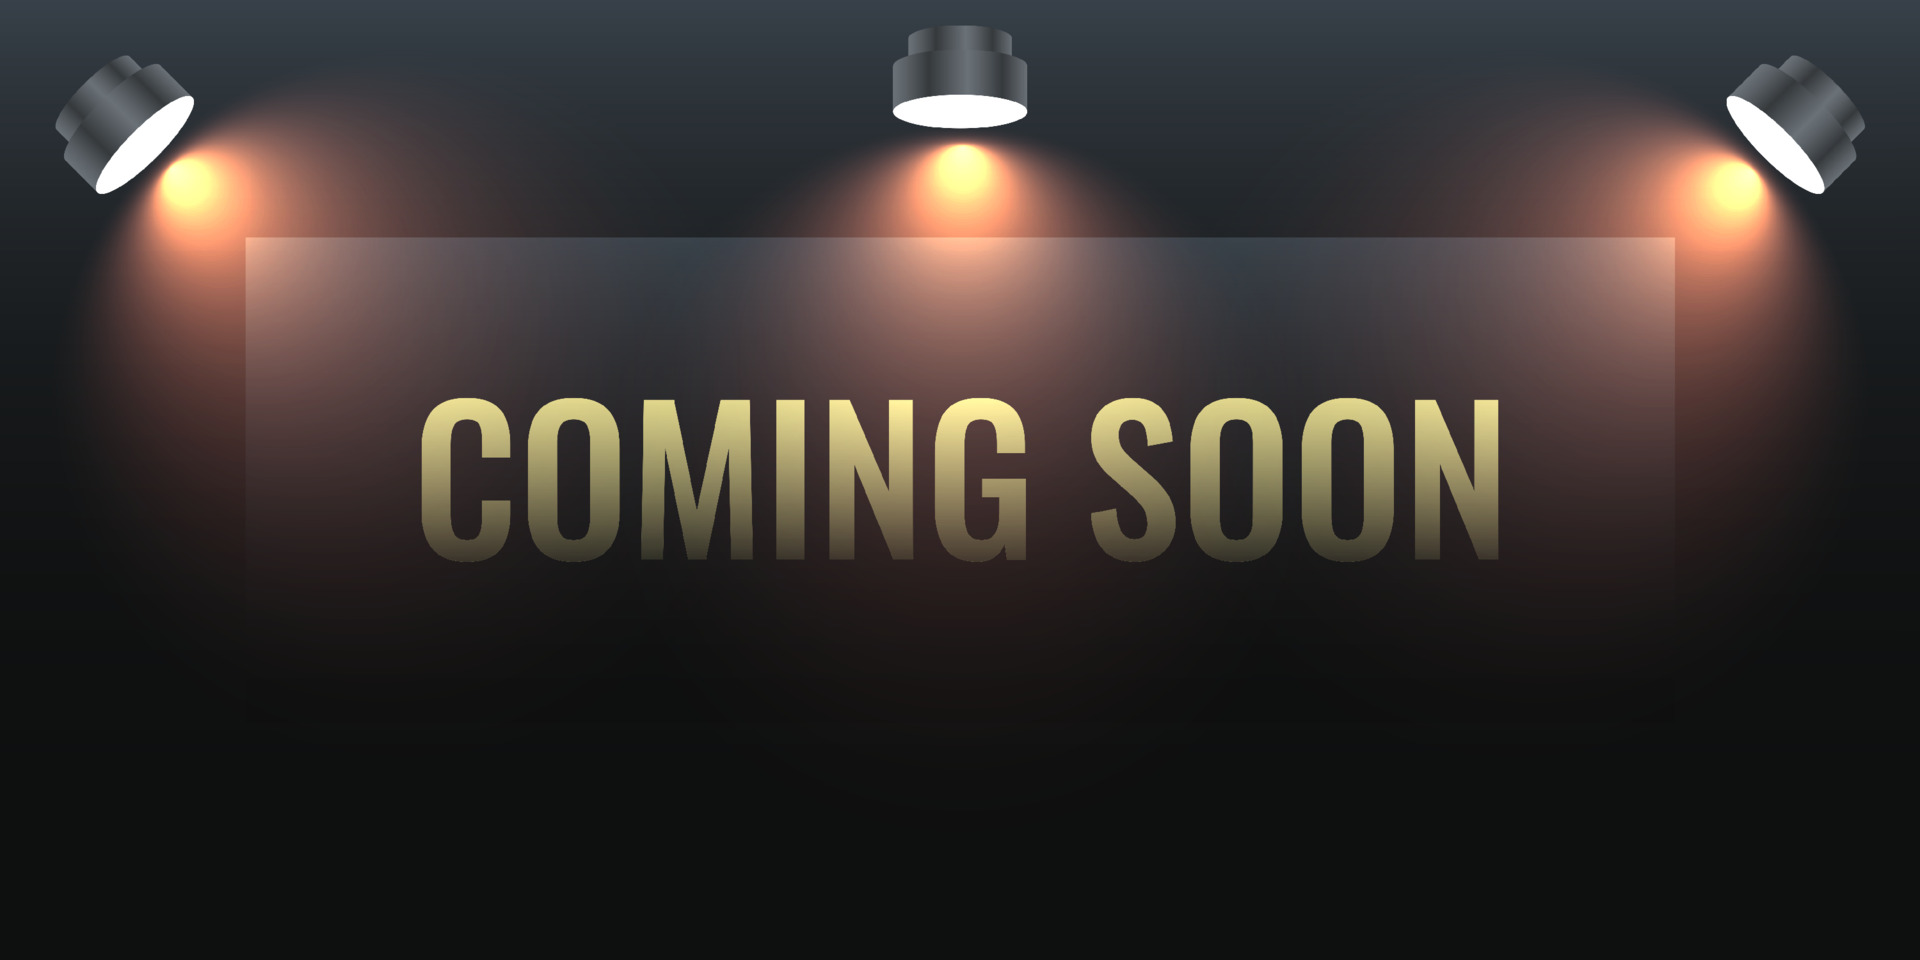 coming-soon-background-illustration-template-design-free-vector1